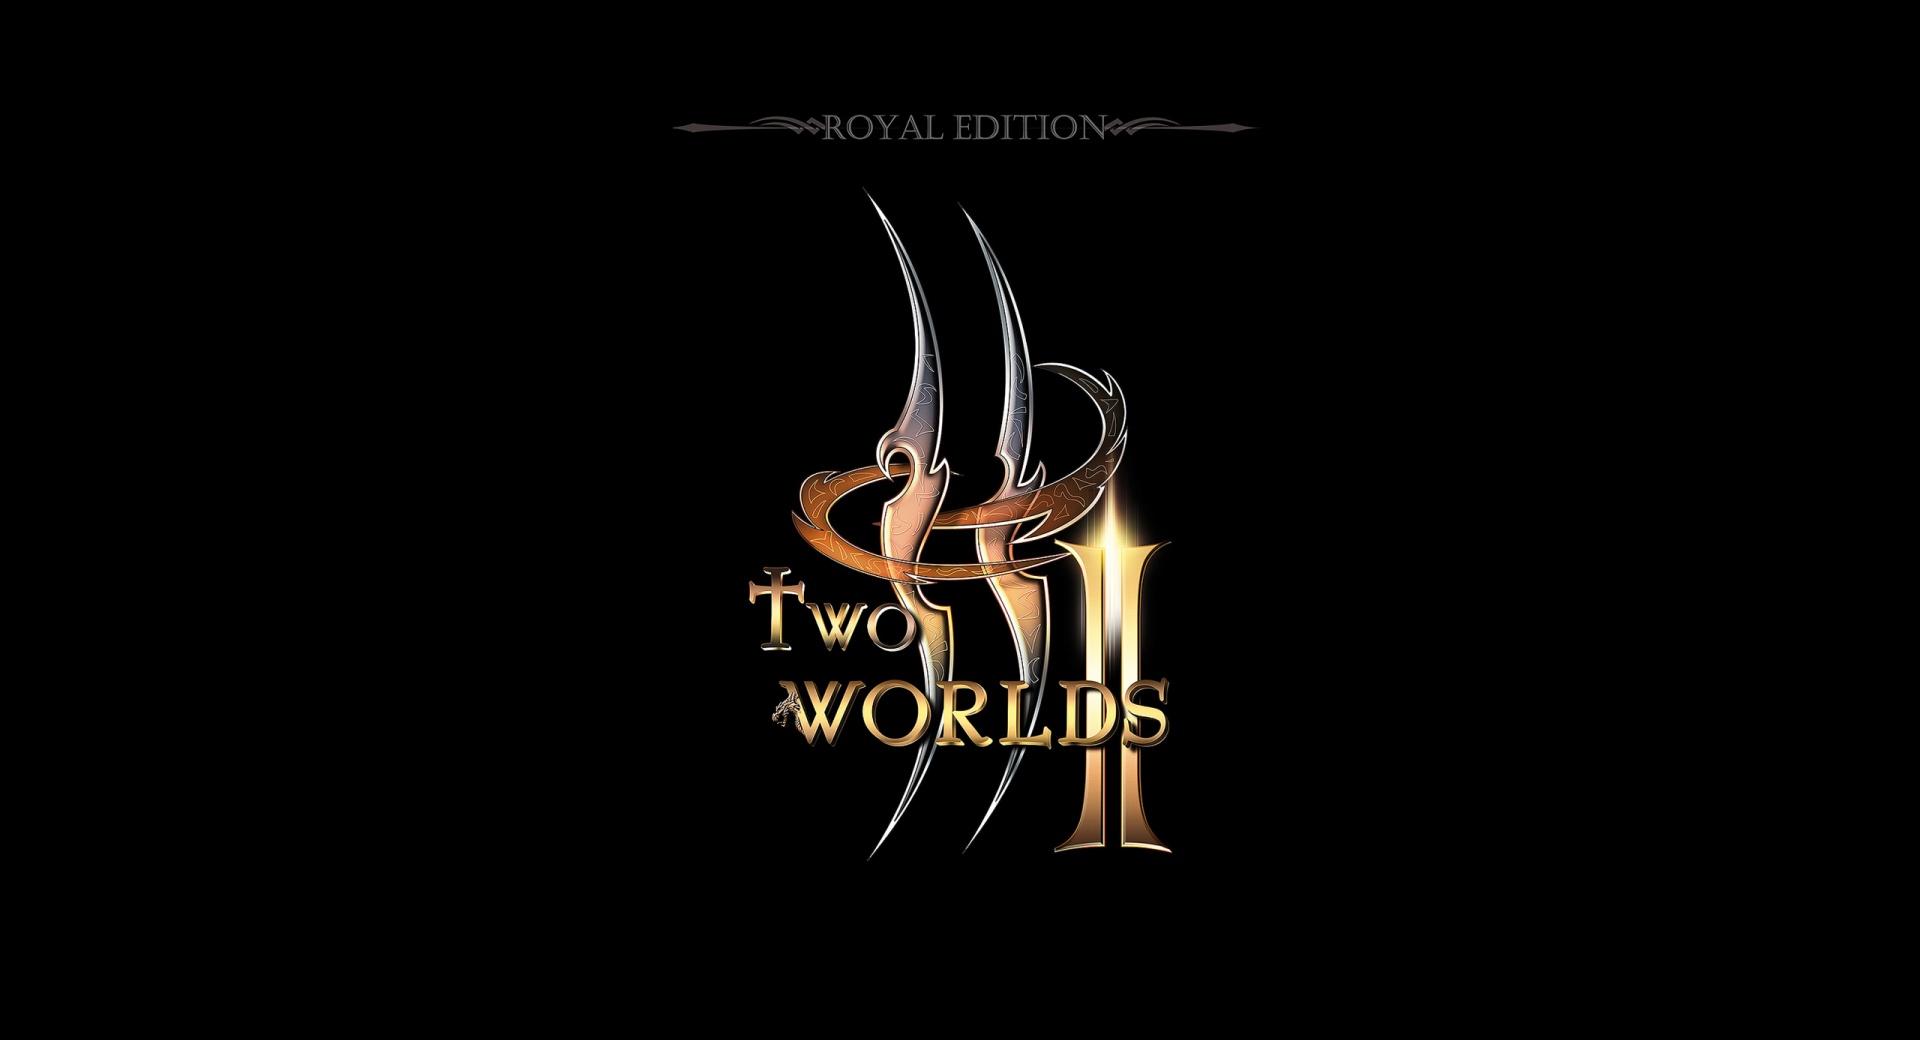 Two Worlds II Royal Edition wallpapers HD quality